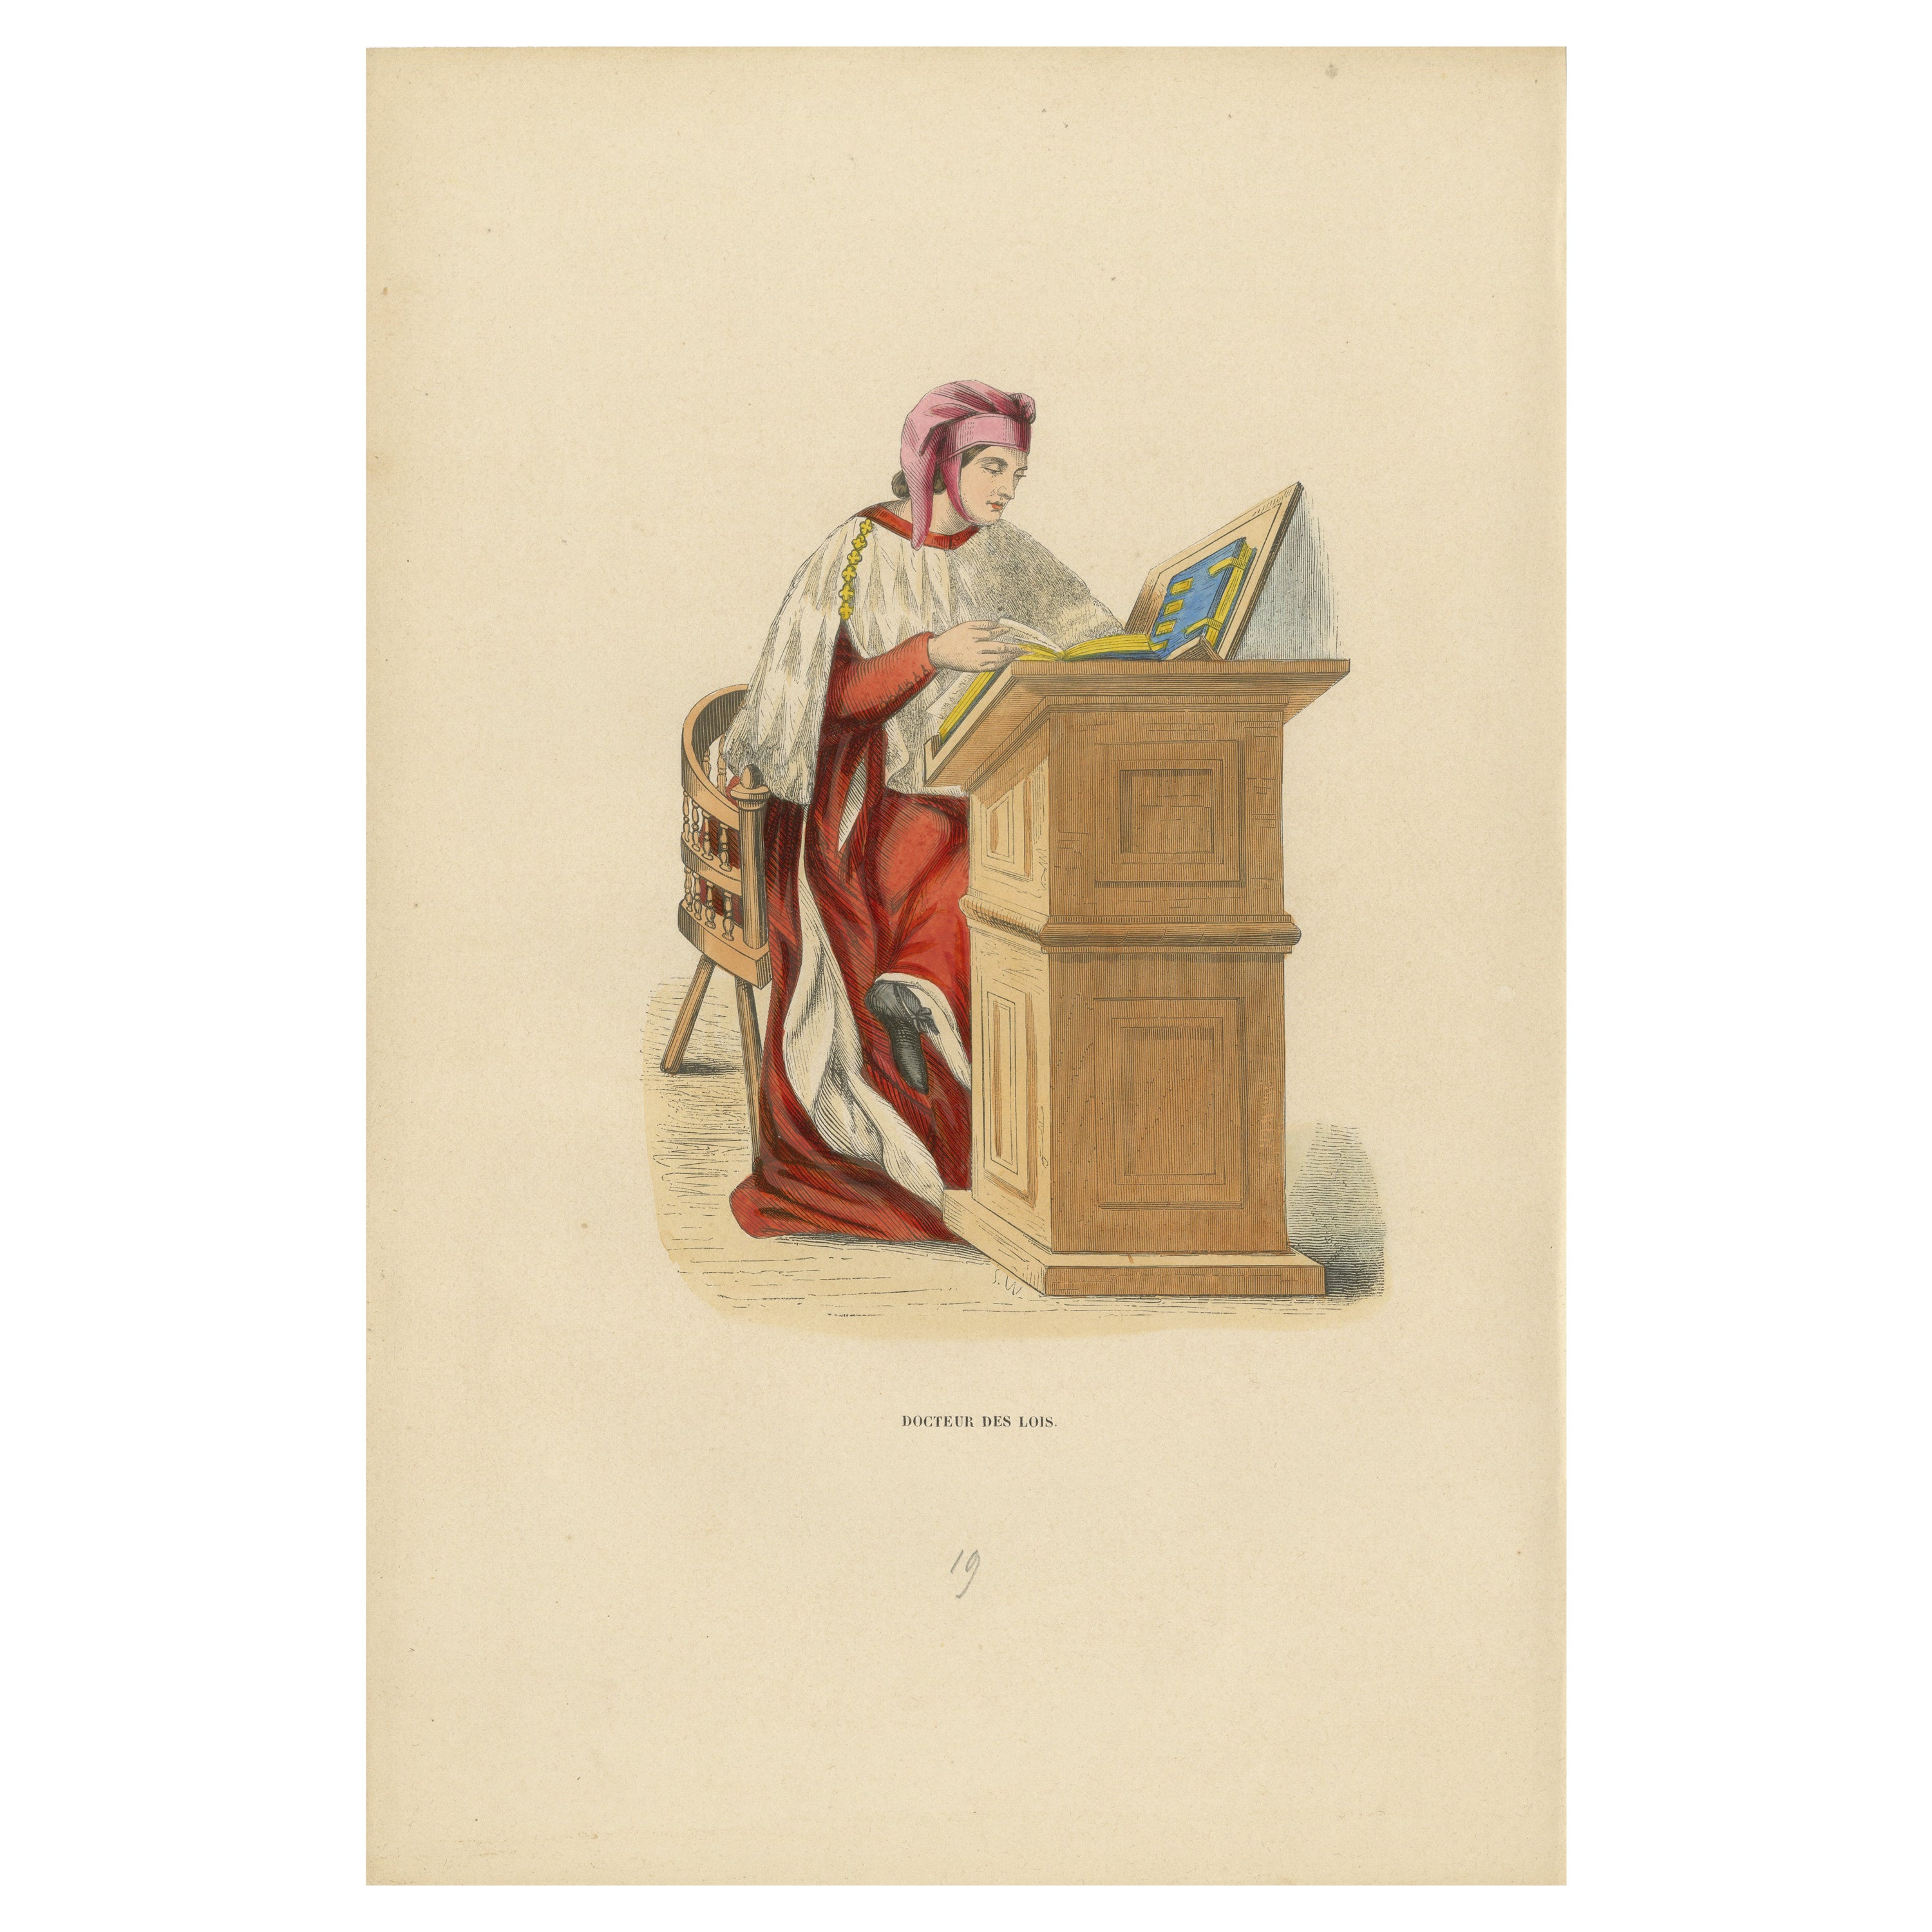 Scholar of the Codex : A Medieval Jurist in Study, 1847